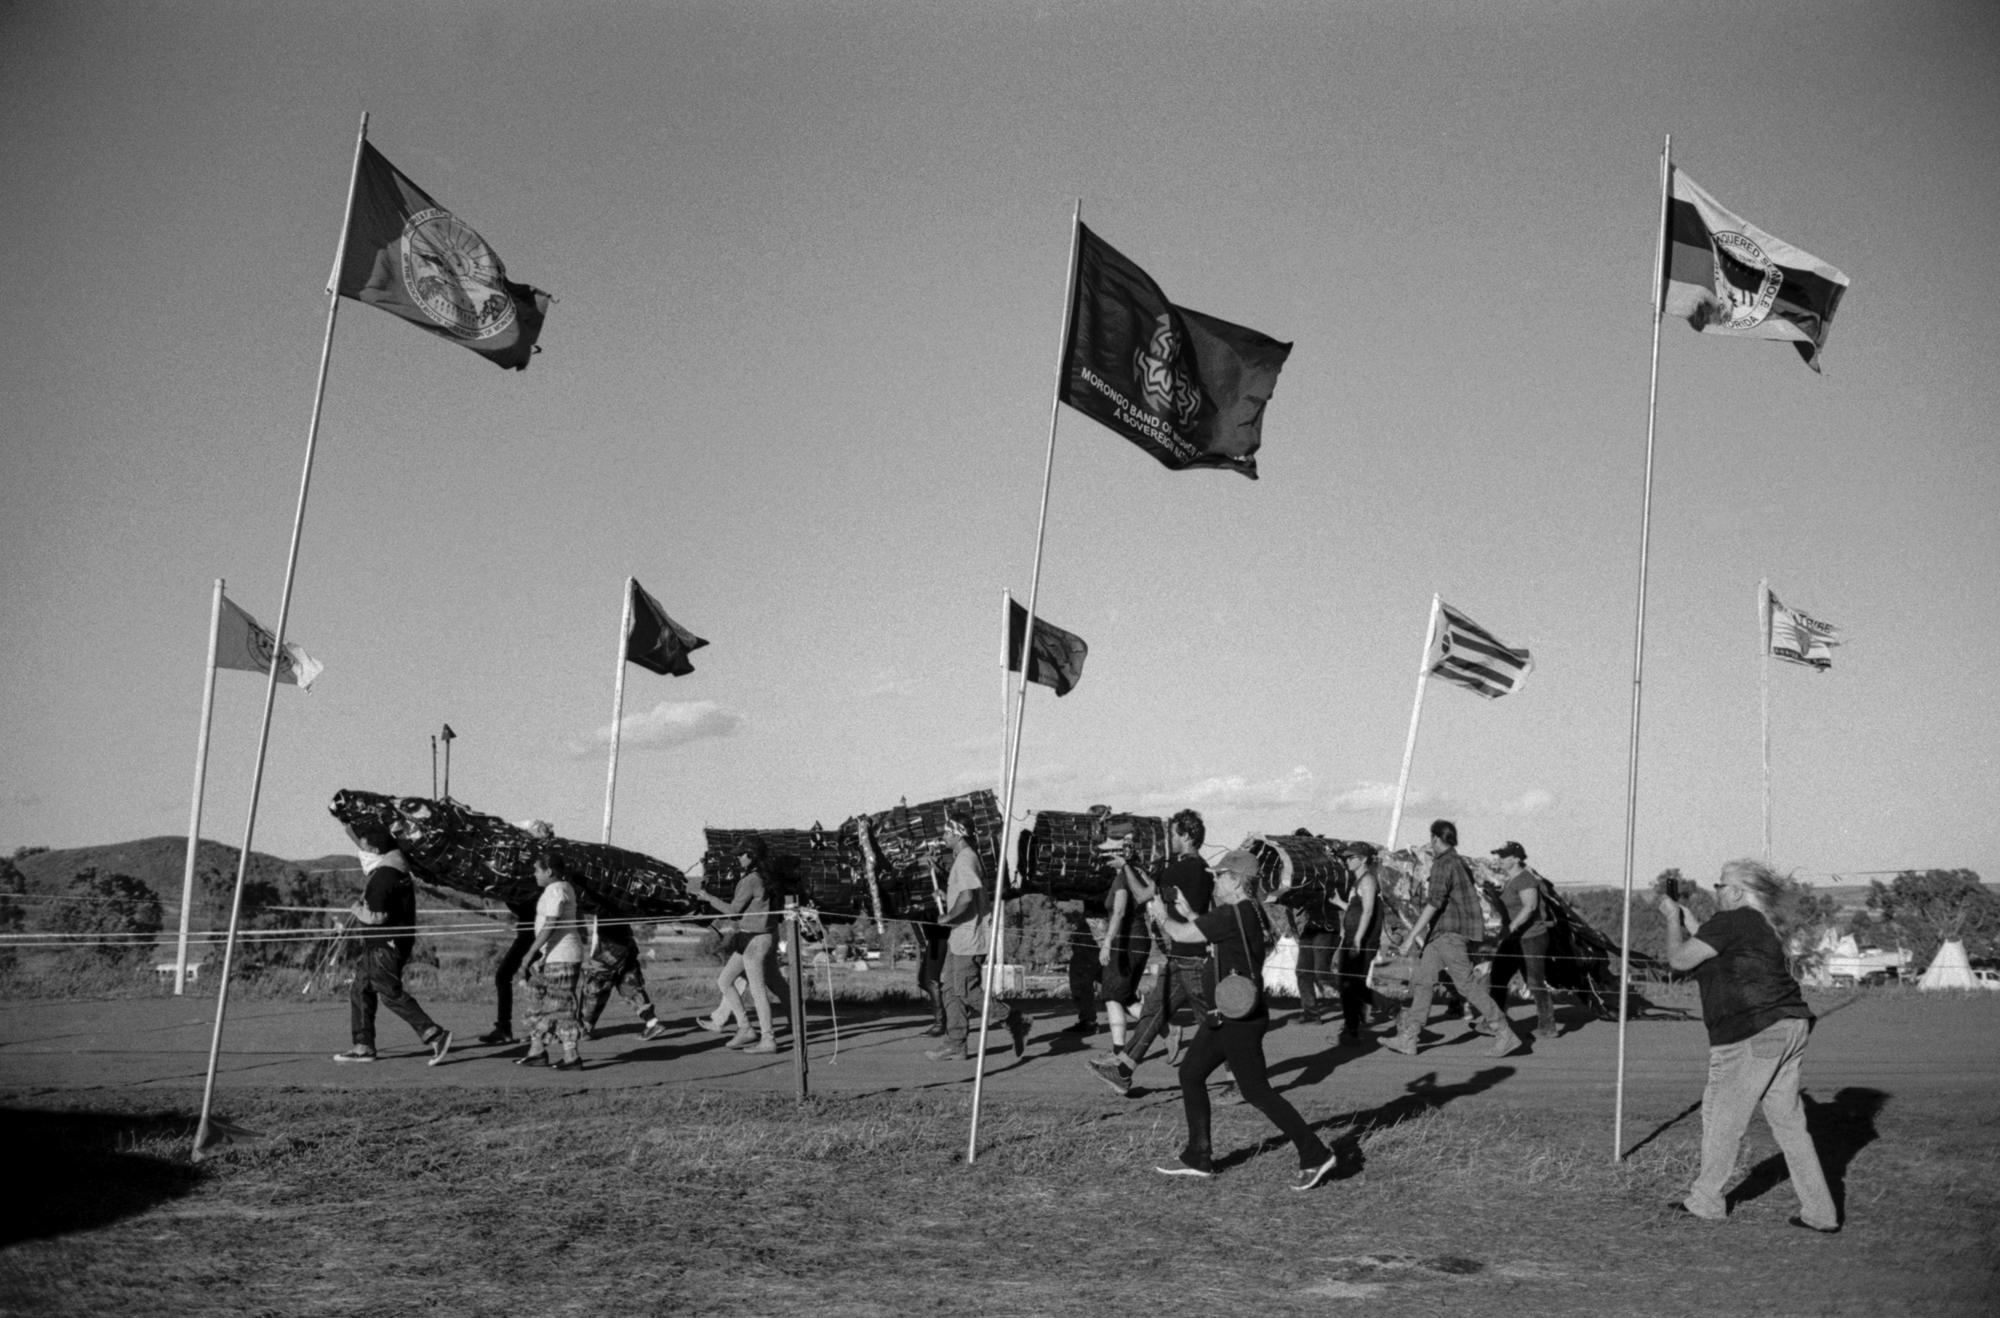 Standing Rock - Through an alley of flags brought by hundreds of...